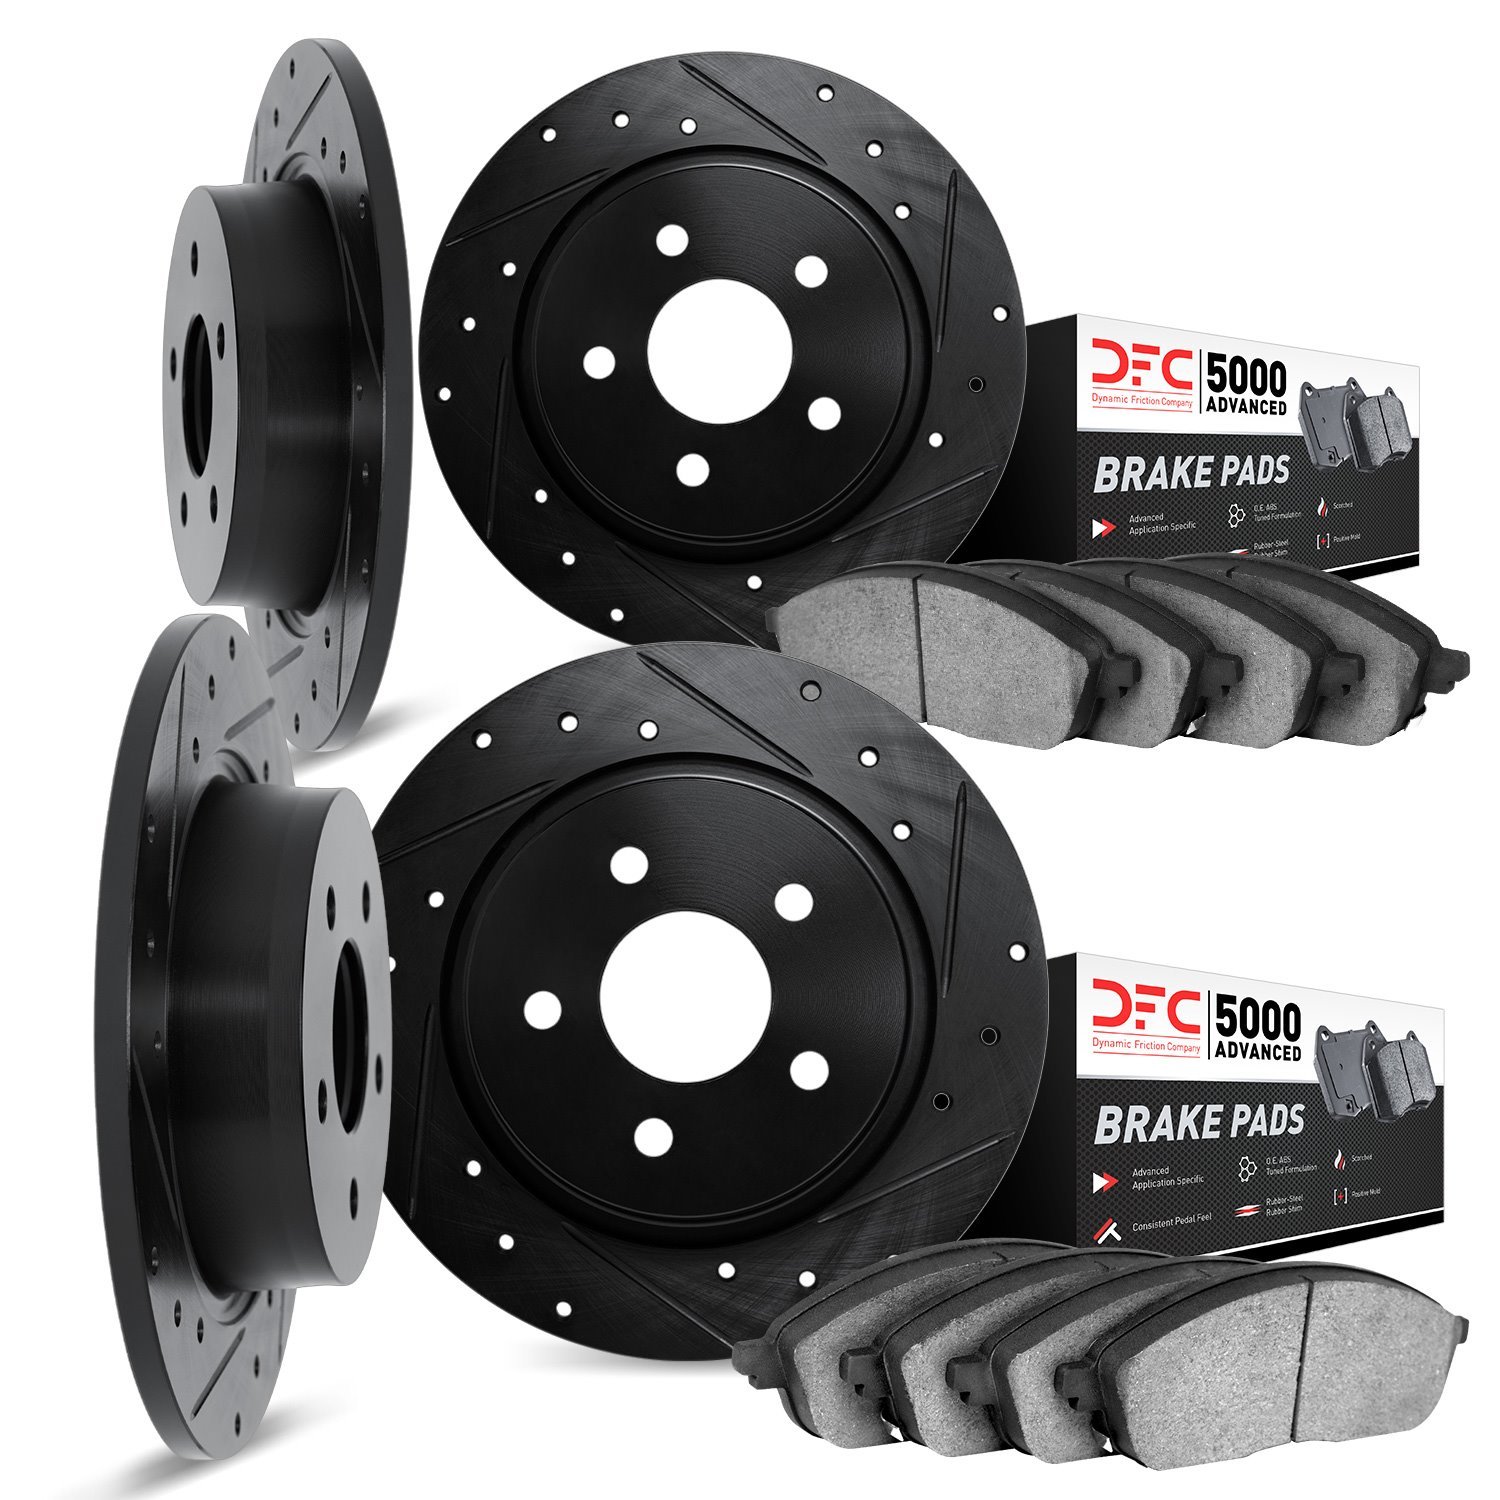 8504-63002 Drilled/Slotted Brake Rotors w/5000 Advanced Brake Pads Kit [Black], 1961-1963 Mercedes-Benz, Position: Front and Rea